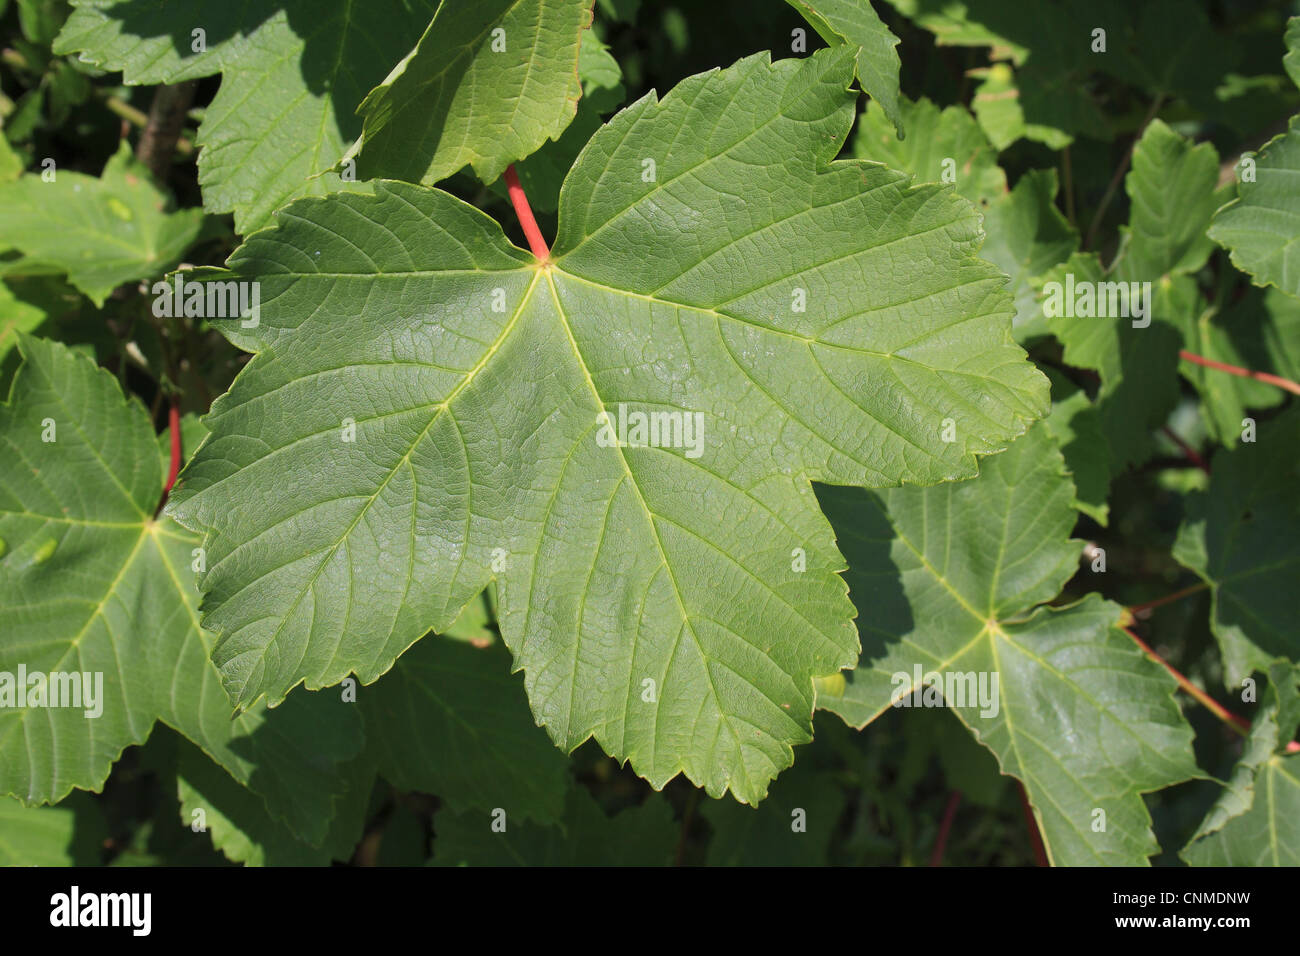 Sycamore (Acer pseudoplatanus) close-up of leaf, Bacton, Suffolk, England, june Stock Photo